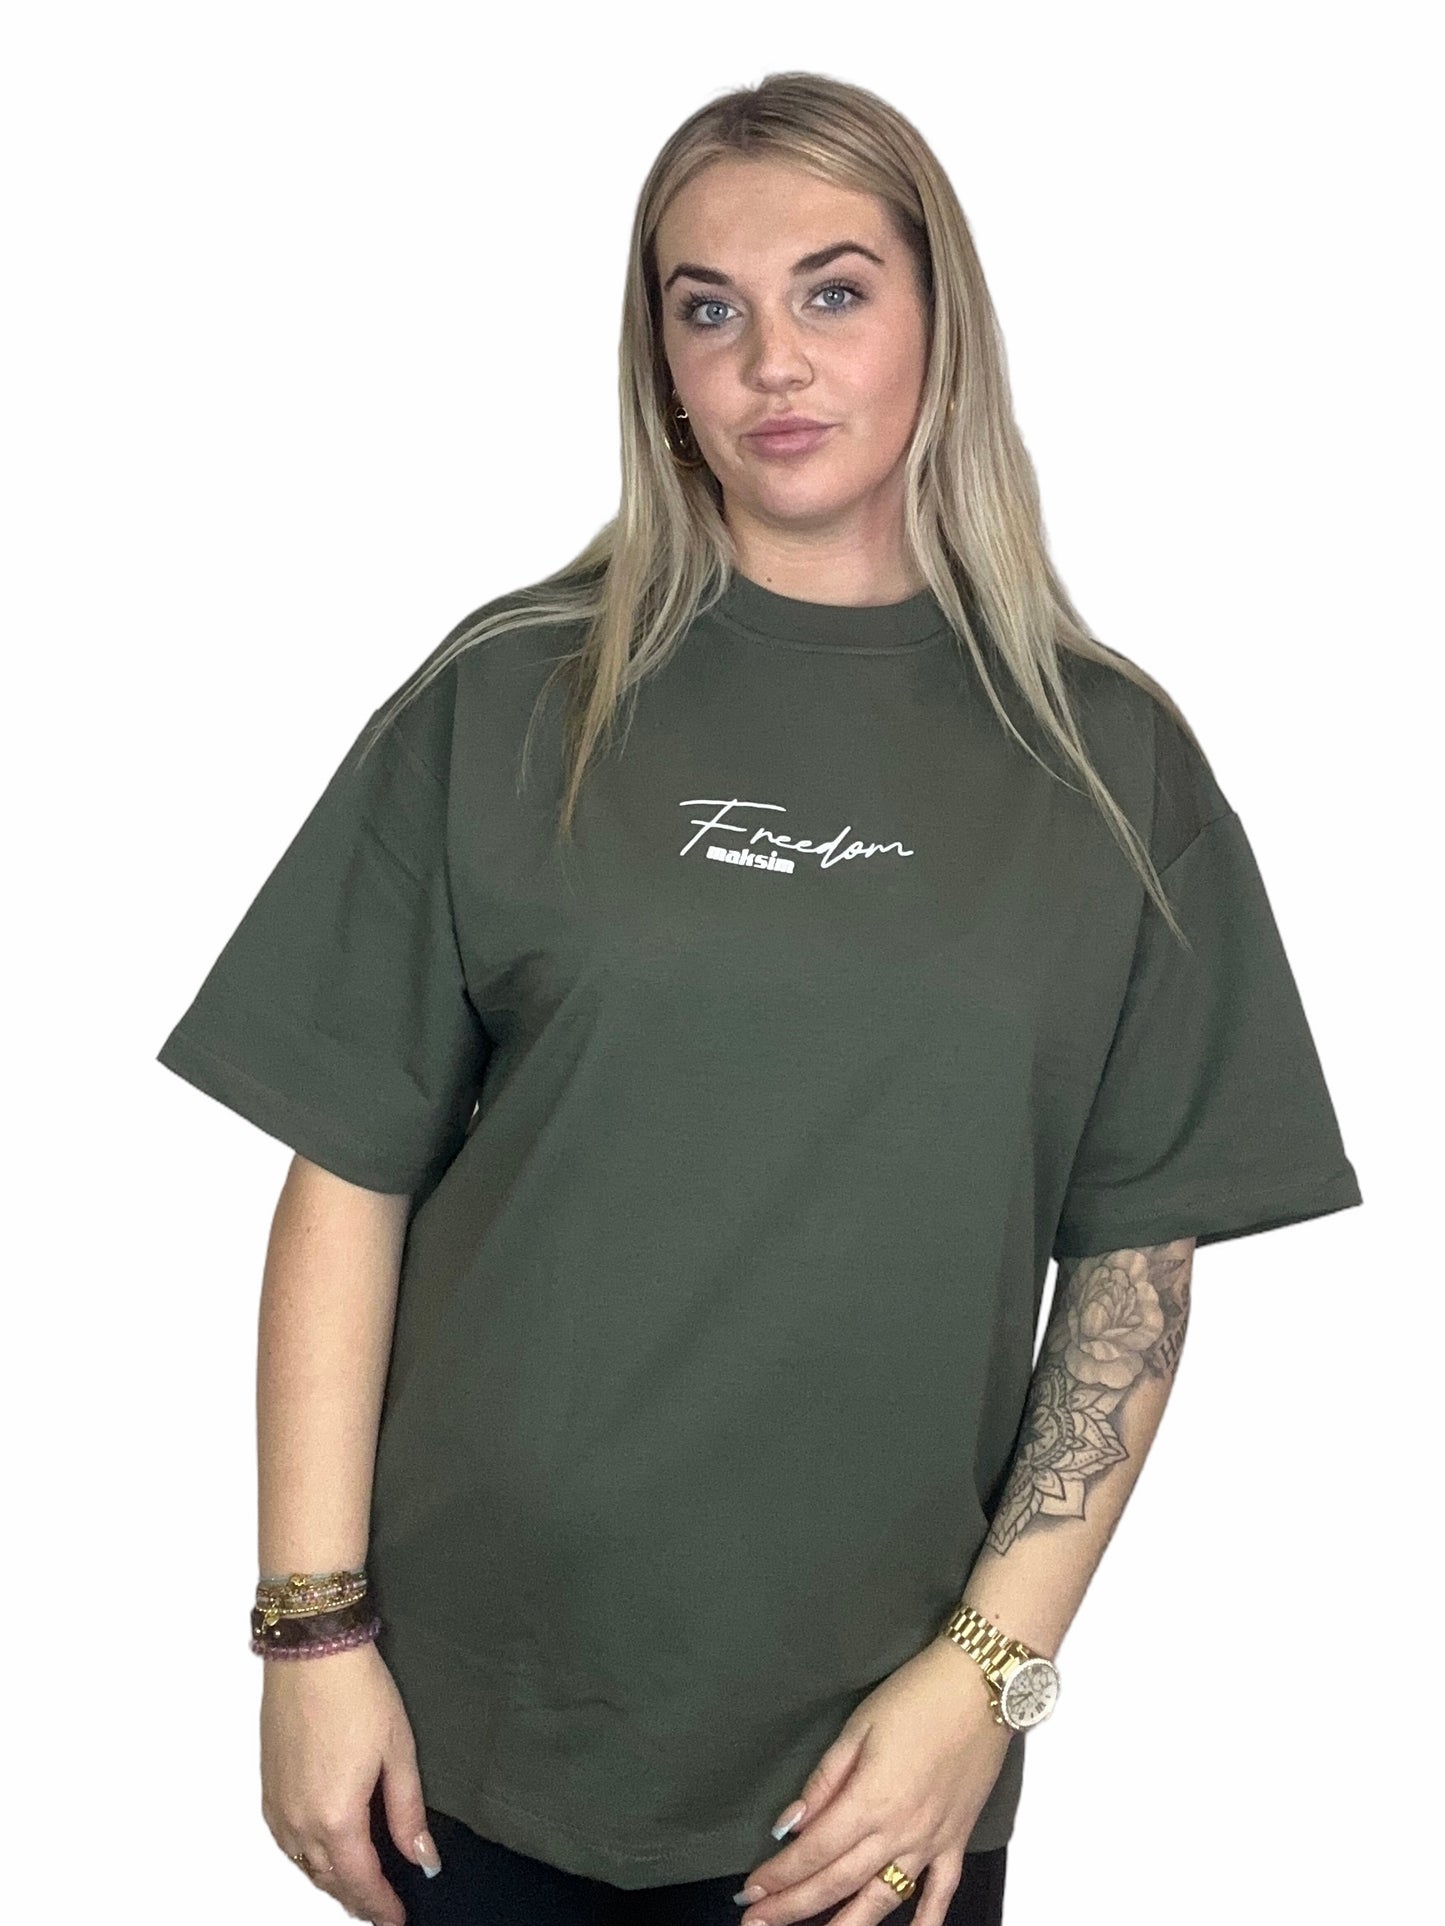 Complete Freedom T-Shirt - Army Groen